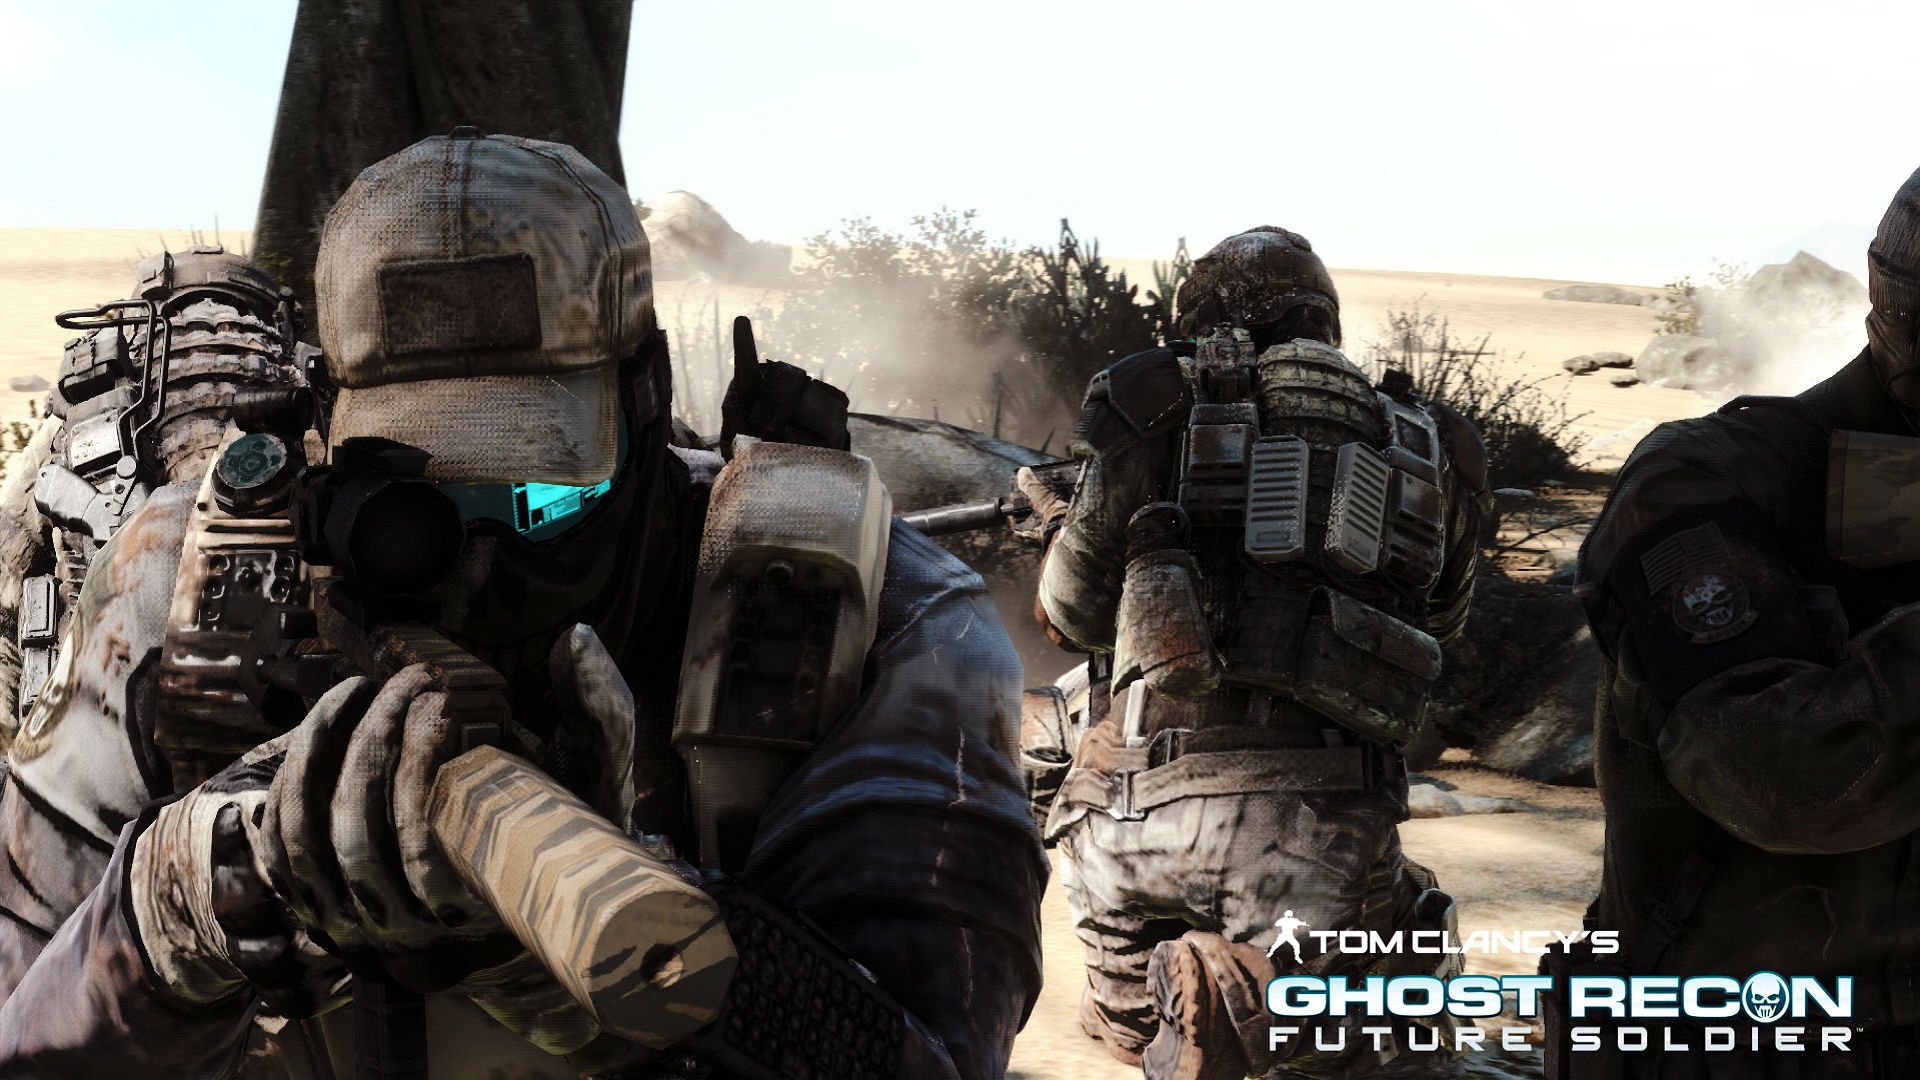 ghost recon future soldier wallpaper,action adventure game,shooter game,games,pc game,soldier